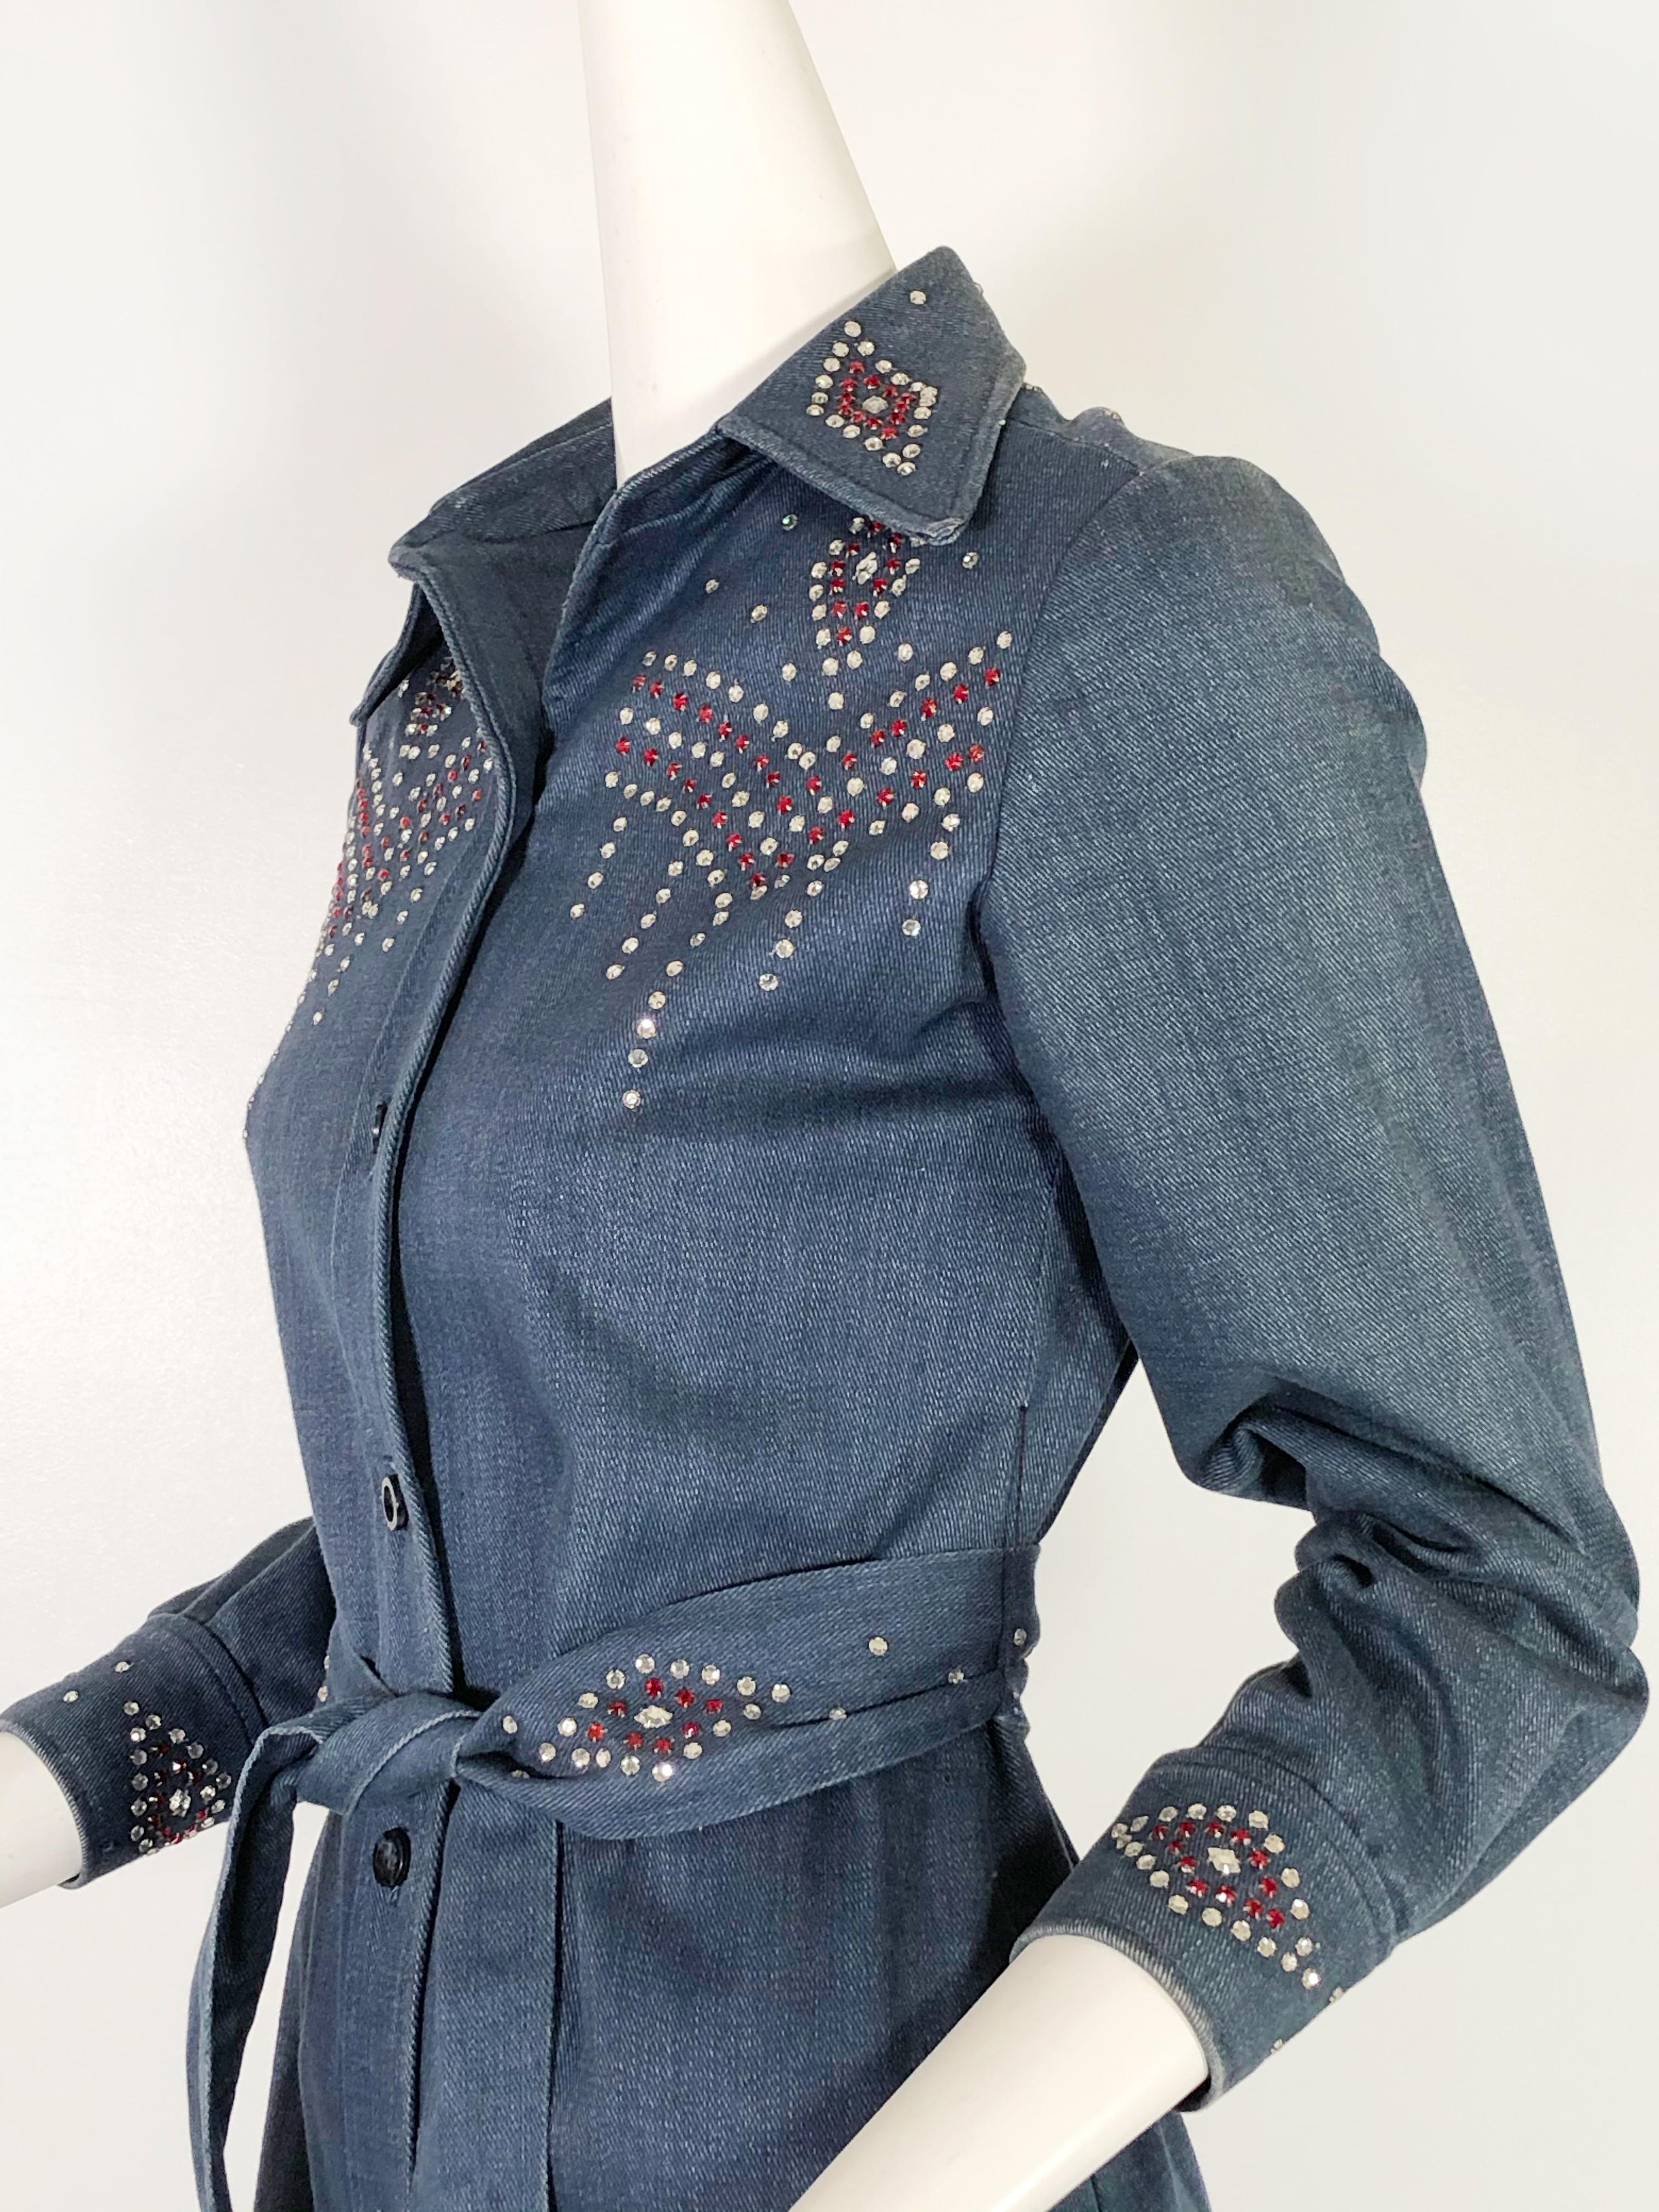 1970's Rhinestone Studded Denim Maxi Coat Dress  In Excellent Condition For Sale In Gresham, OR